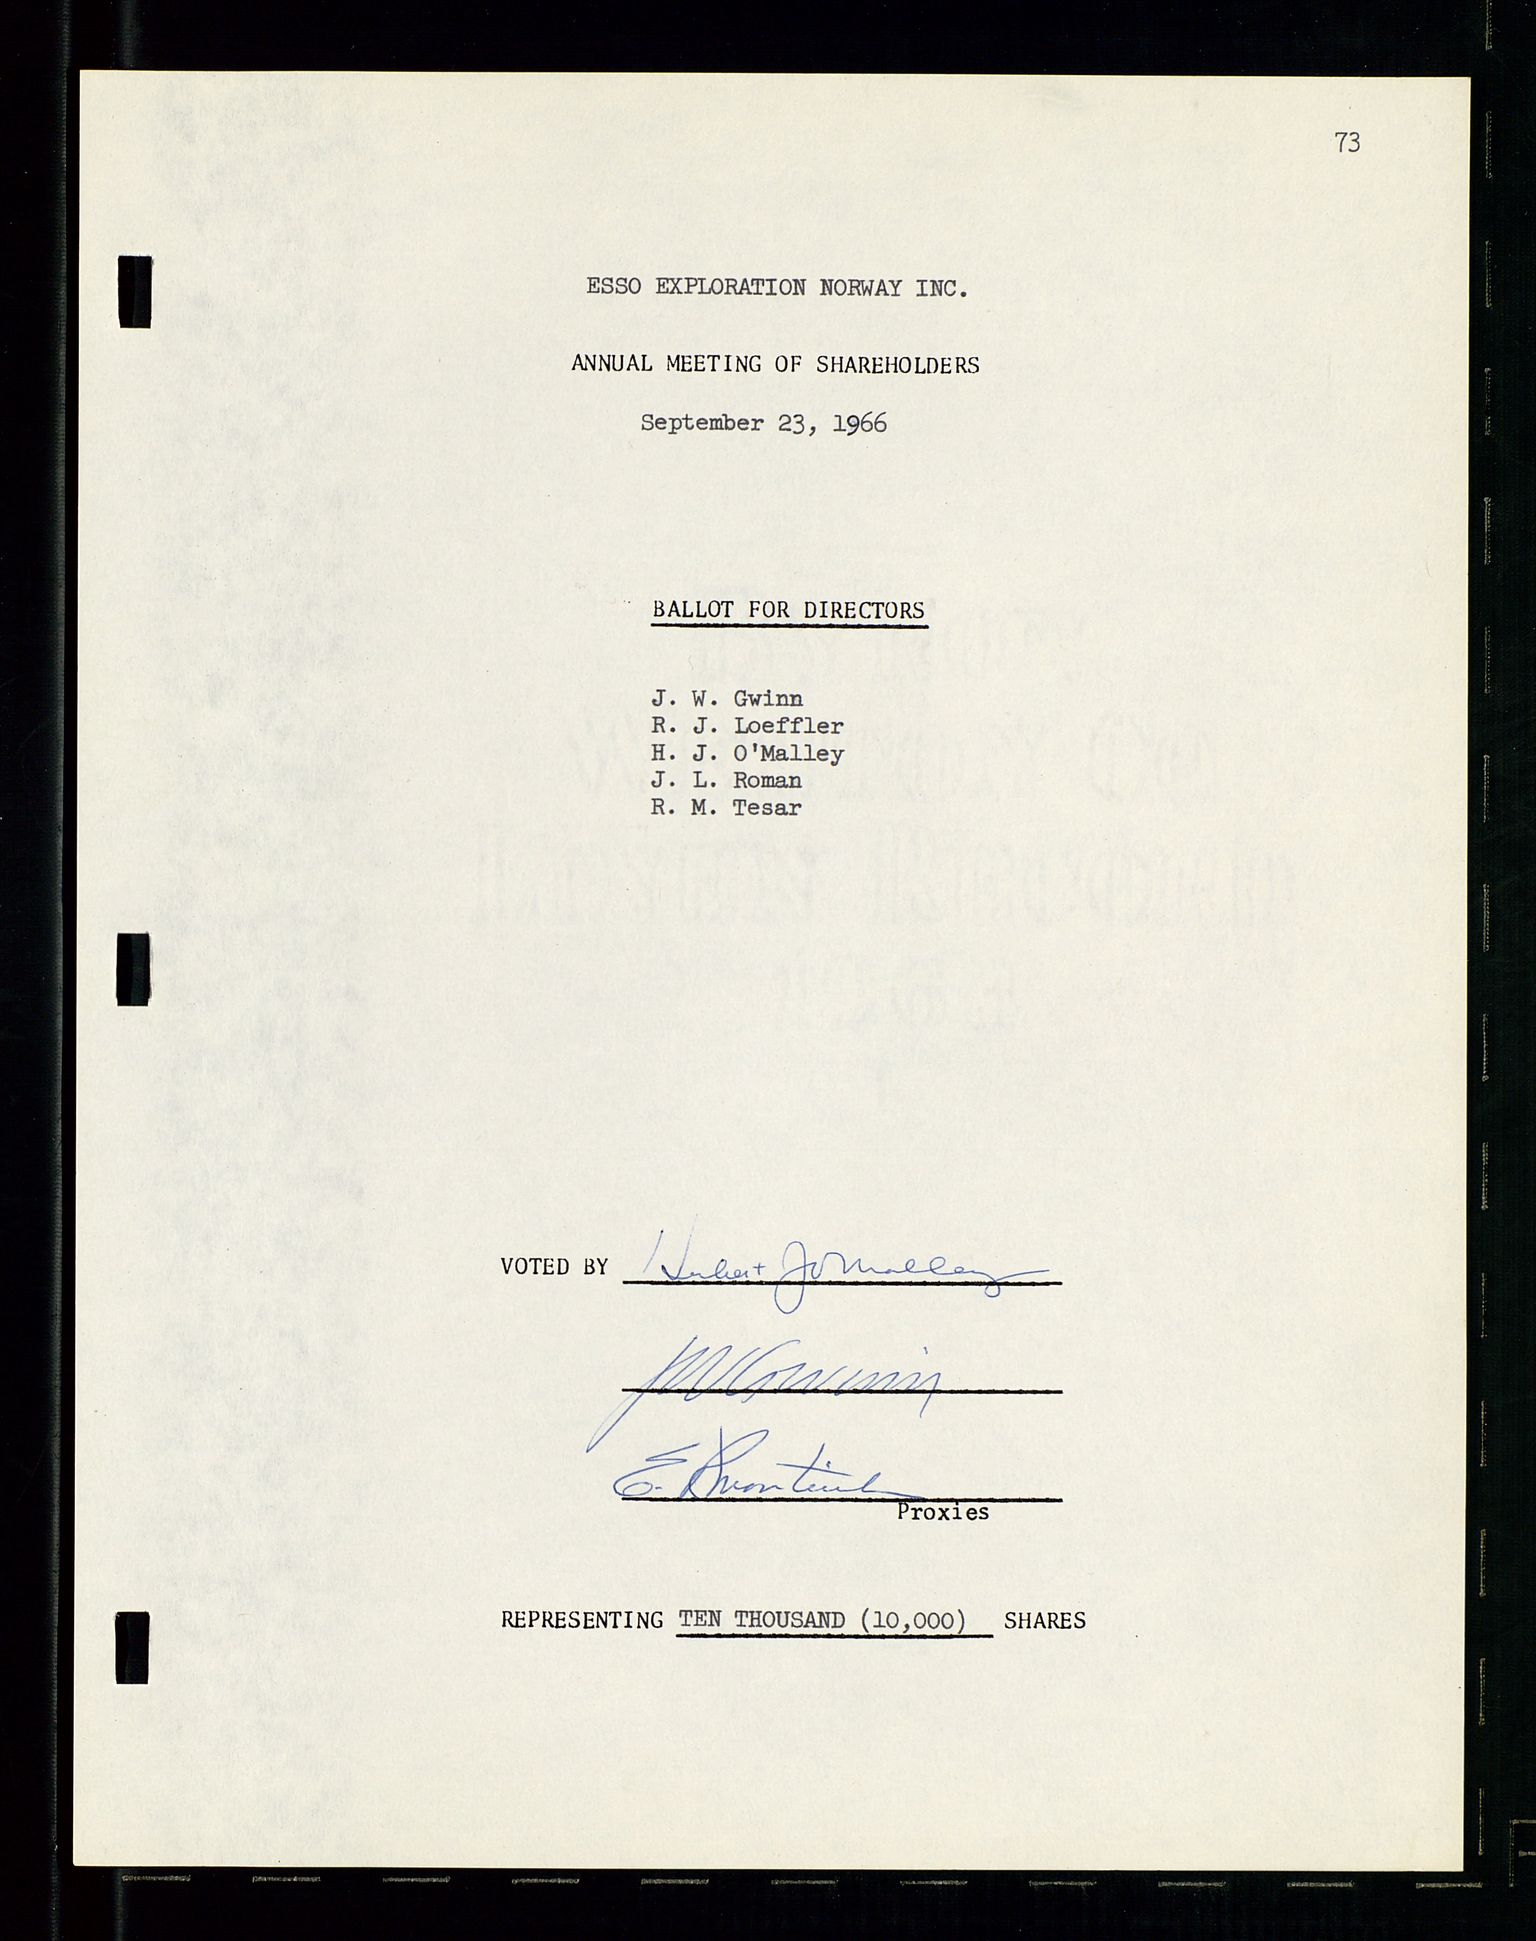 Pa 1512 - Esso Exploration and Production Norway Inc., SAST/A-101917/A/Aa/L0001/0001: Styredokumenter / Corporate records, By-Laws, Board meeting minutes, Incorporations, 1965-1975, p. 73